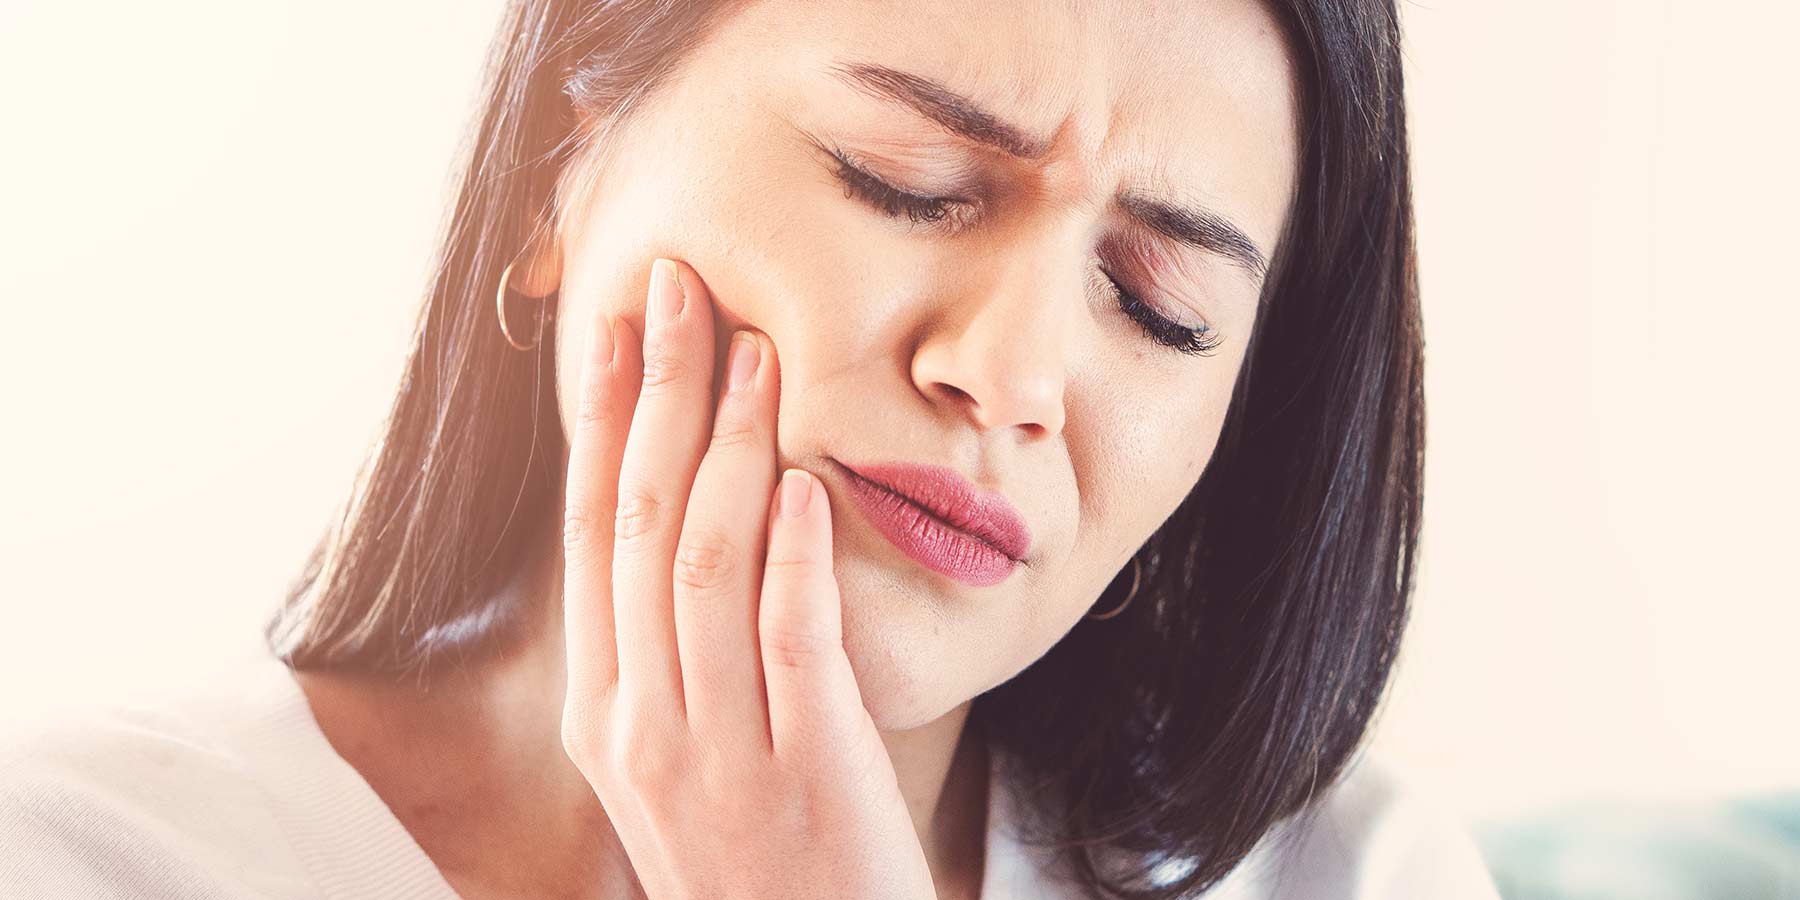 tooth infection pain